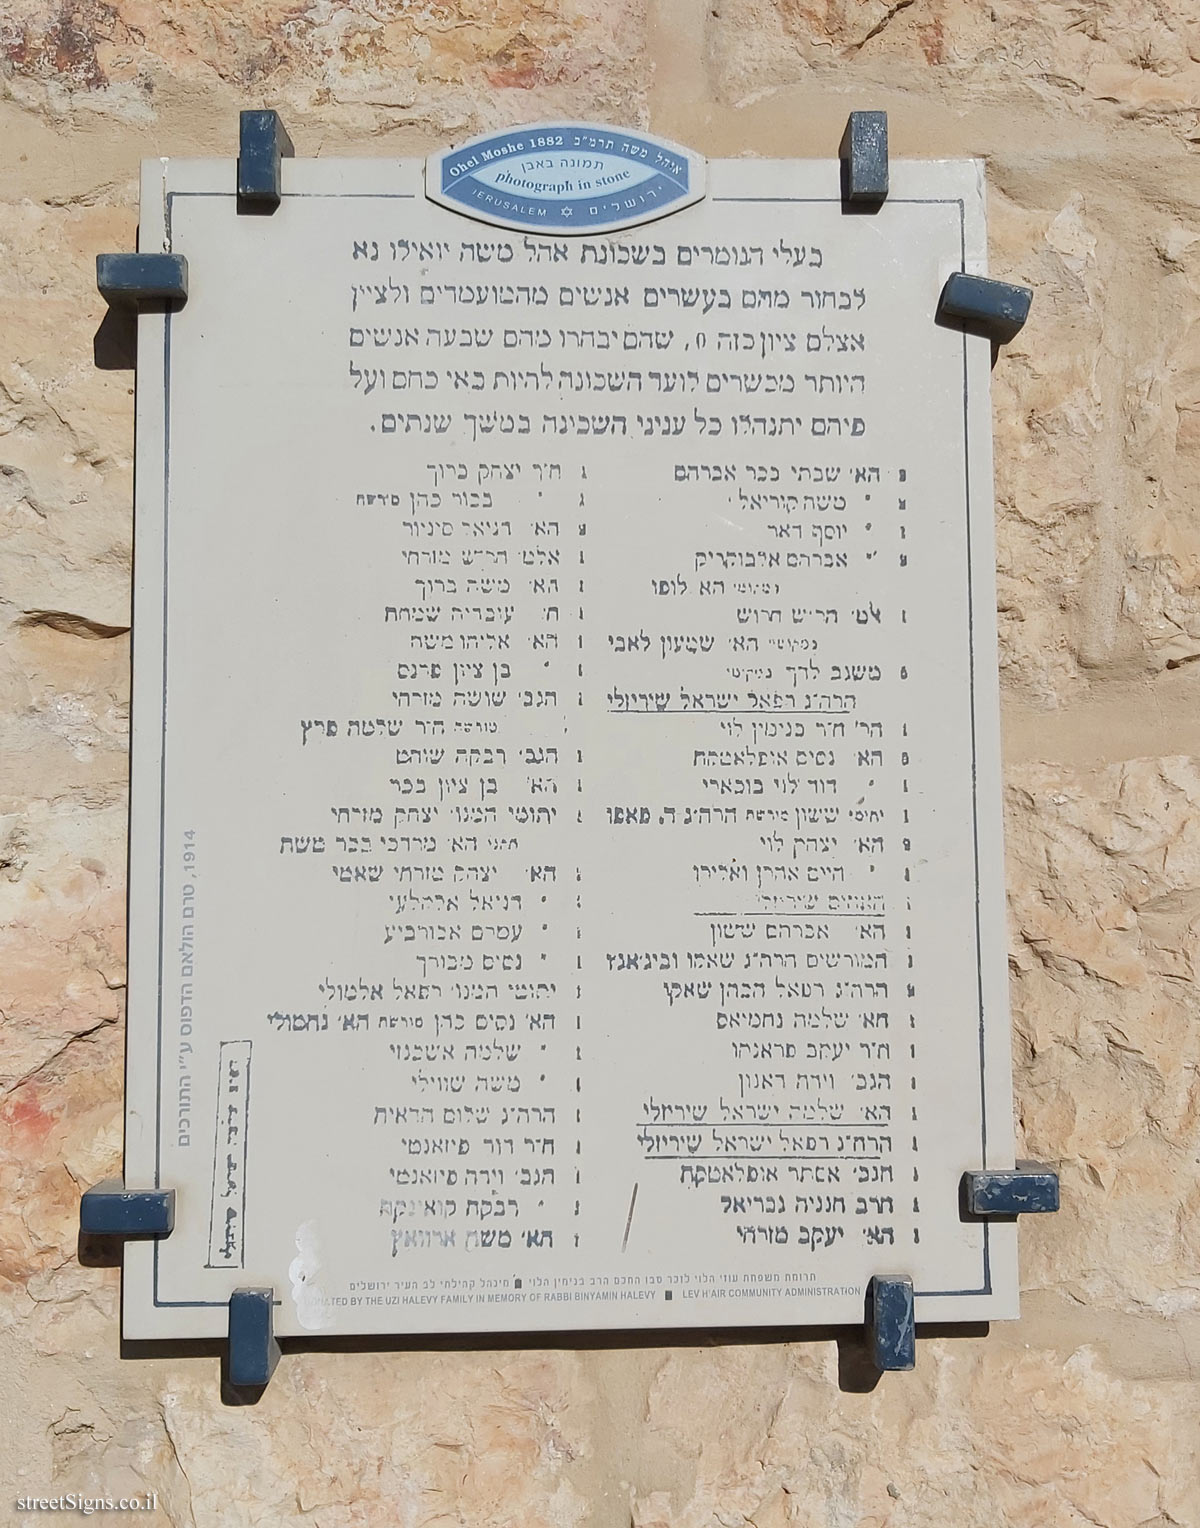 Jerusalem - Photograph in stone - Elections to the Ohel Moshe neighborhood committee - Panel 1